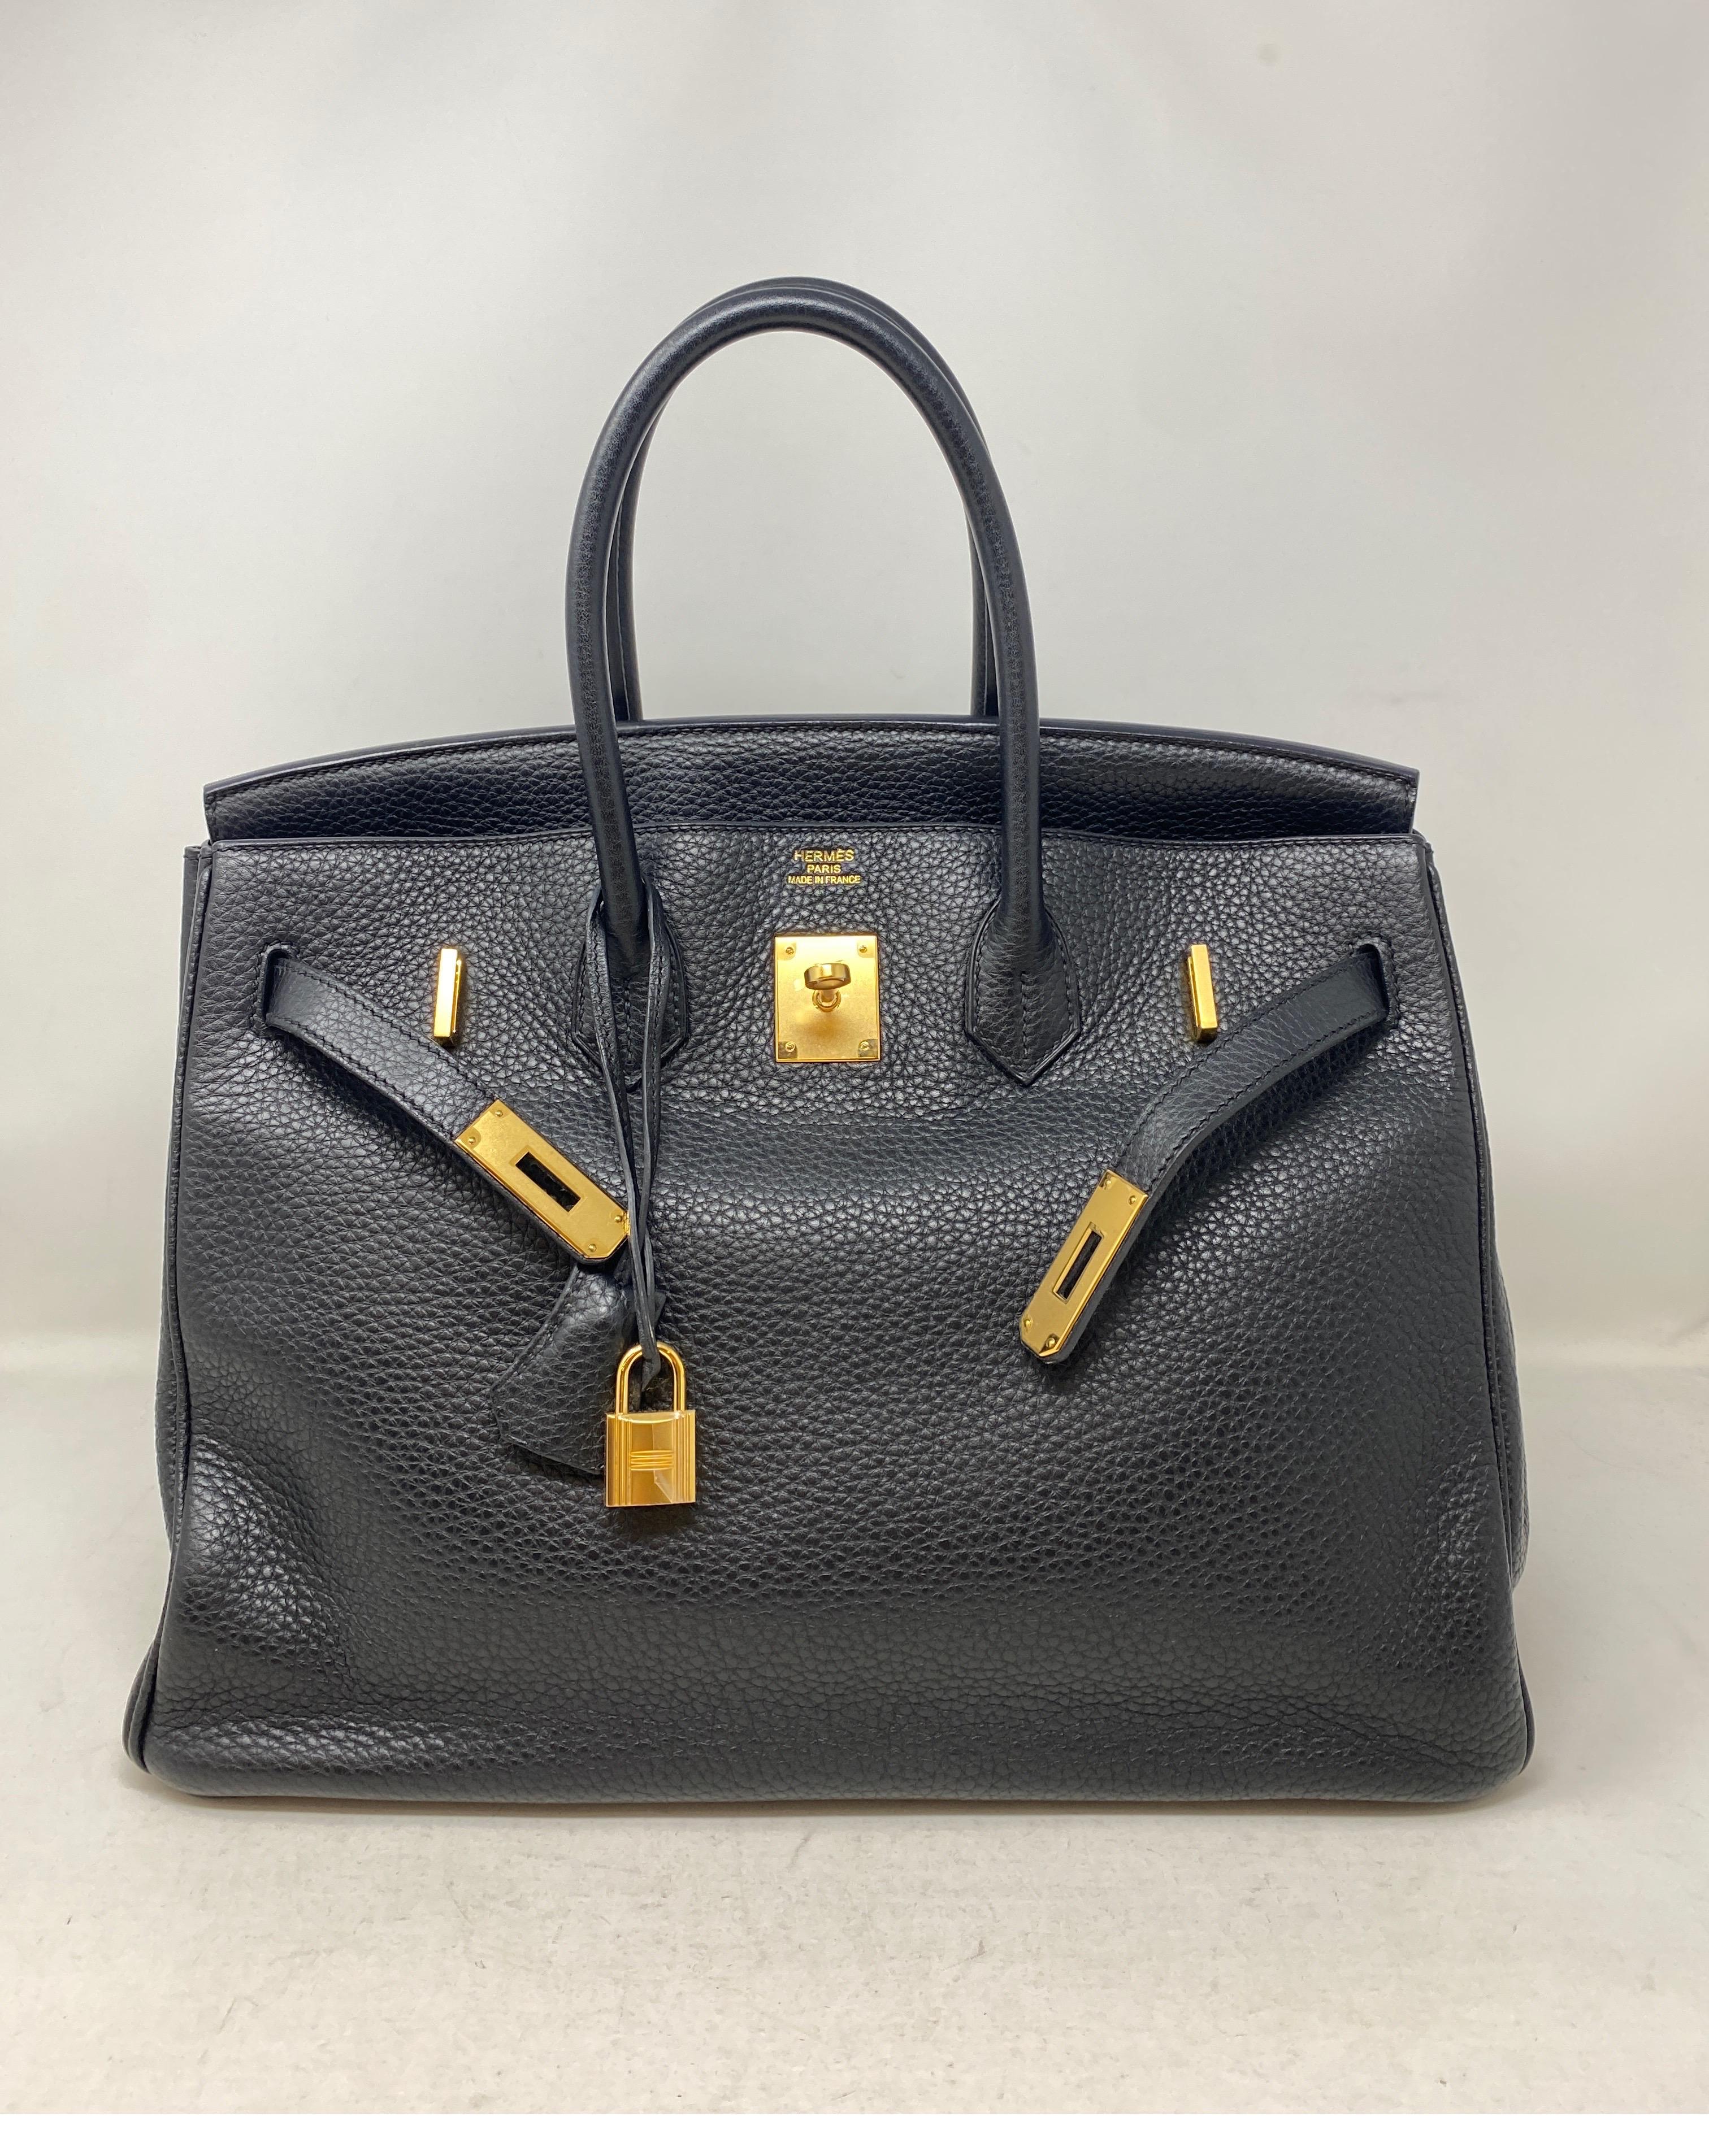 Hermes Black Birkin 35 Bag. Classic combination black and gold Birkin. Togo leather. Excellent condition. Great investment bag. Includes clochette, lock, keys, and dust bag. Guaranteed authentic. 